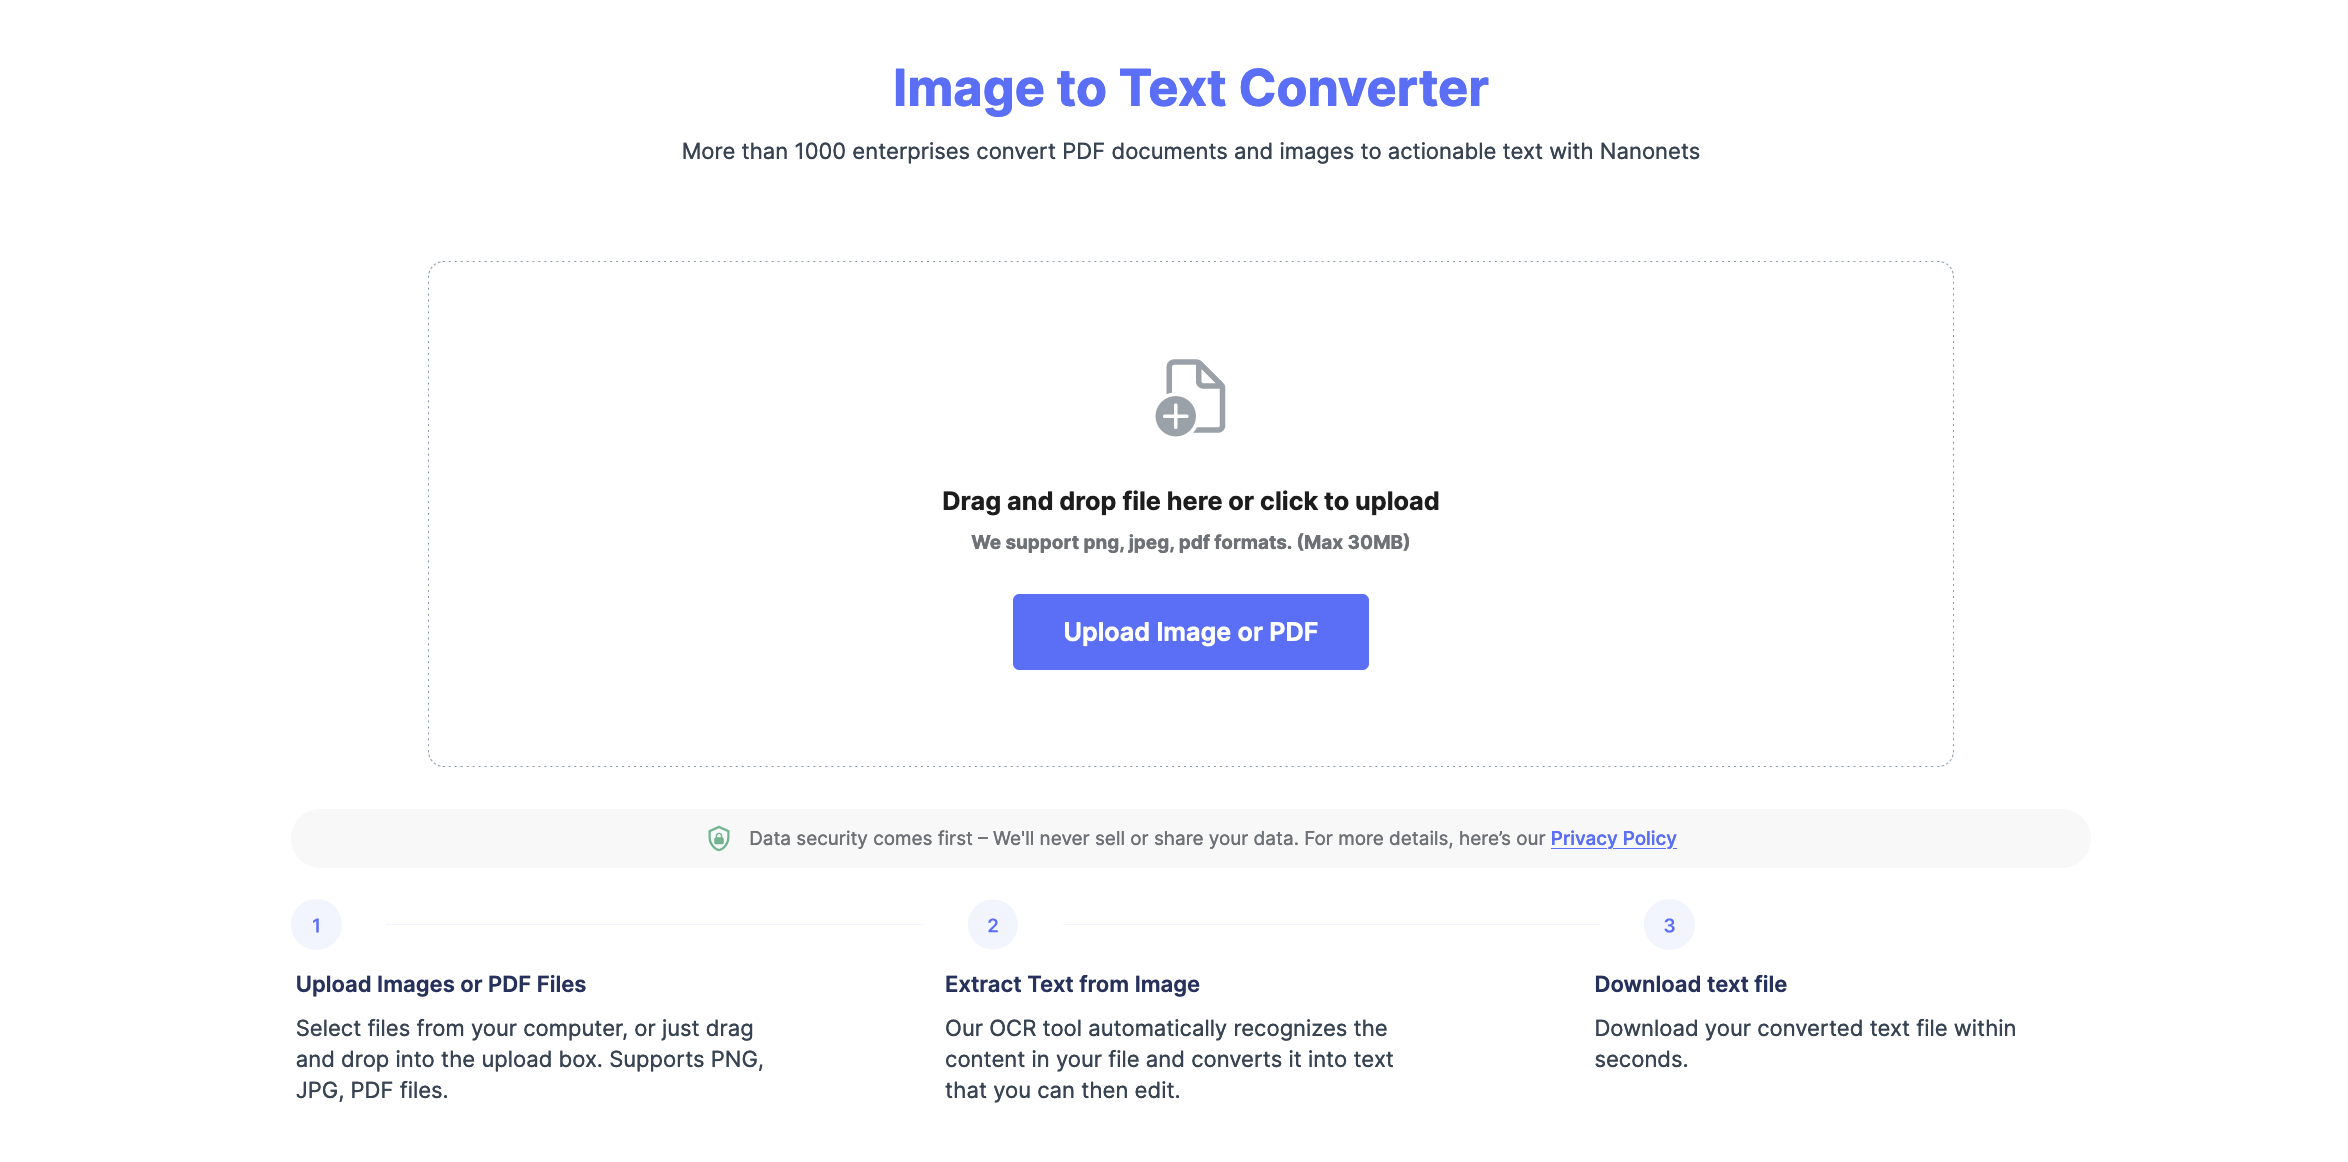 How to convert images to text? : 3 ways to extract text from images